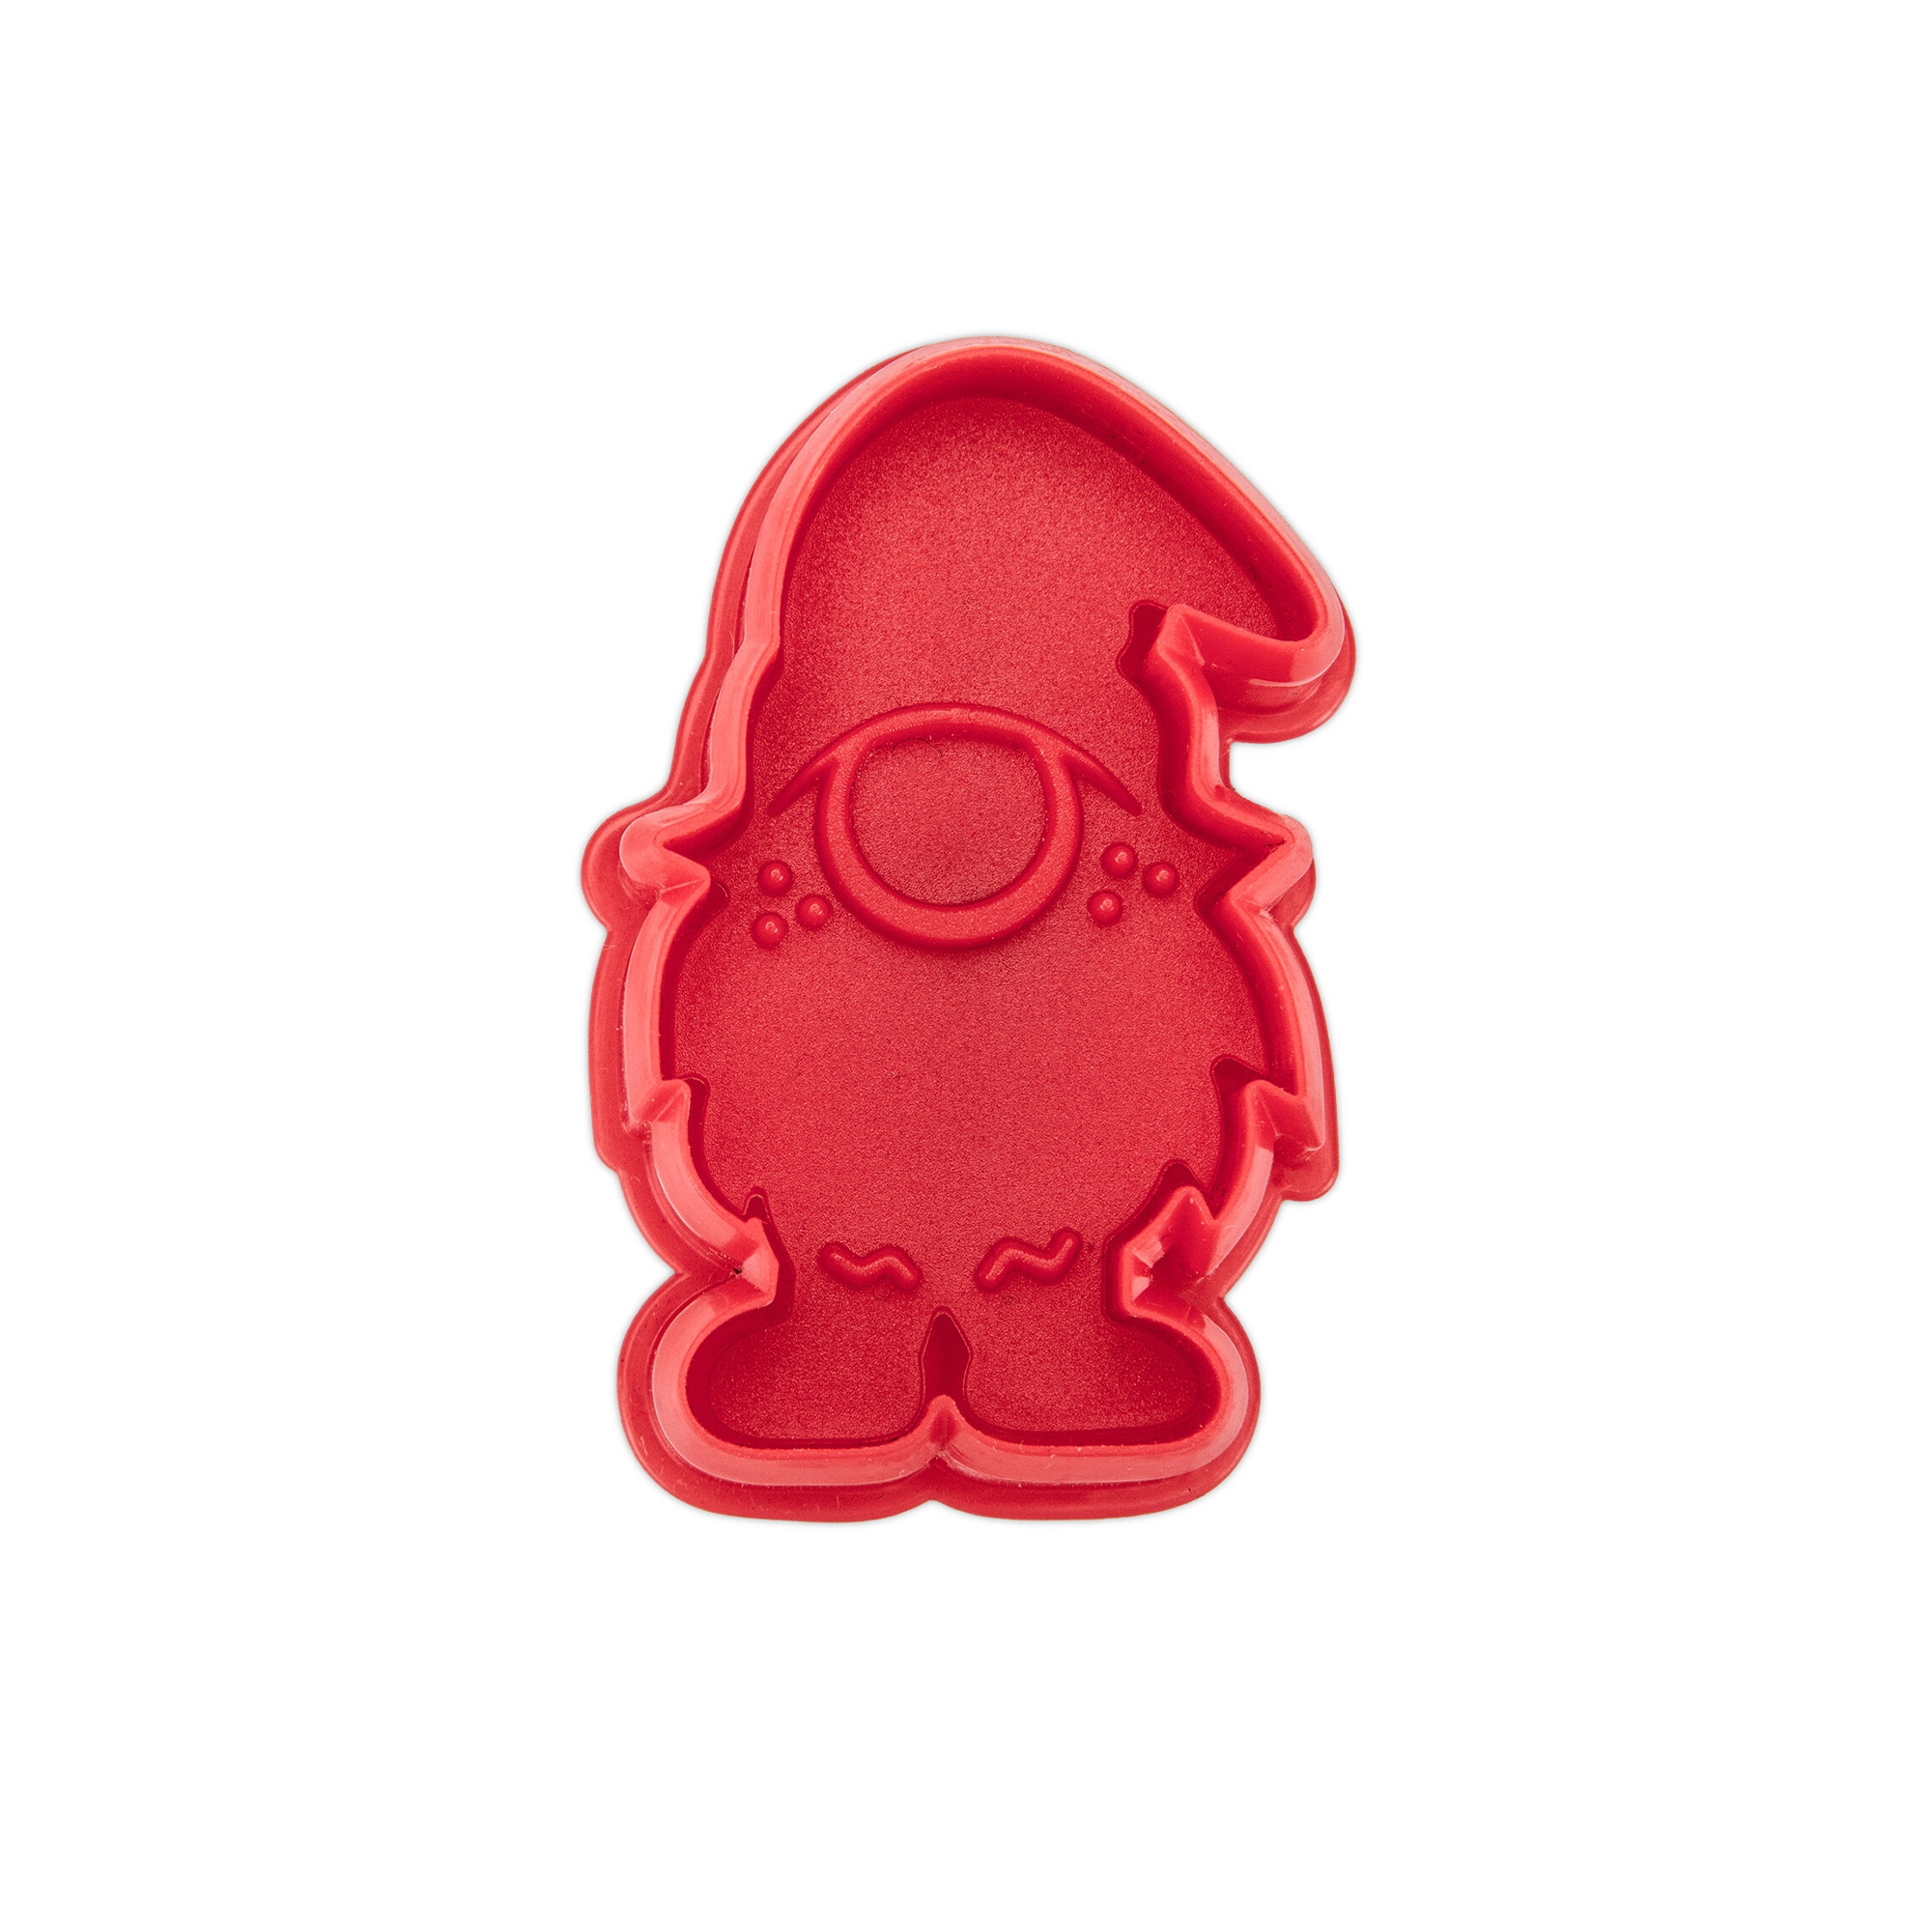 Städter - Cookie cutter with stamp and ejector Elf, 6 cm red